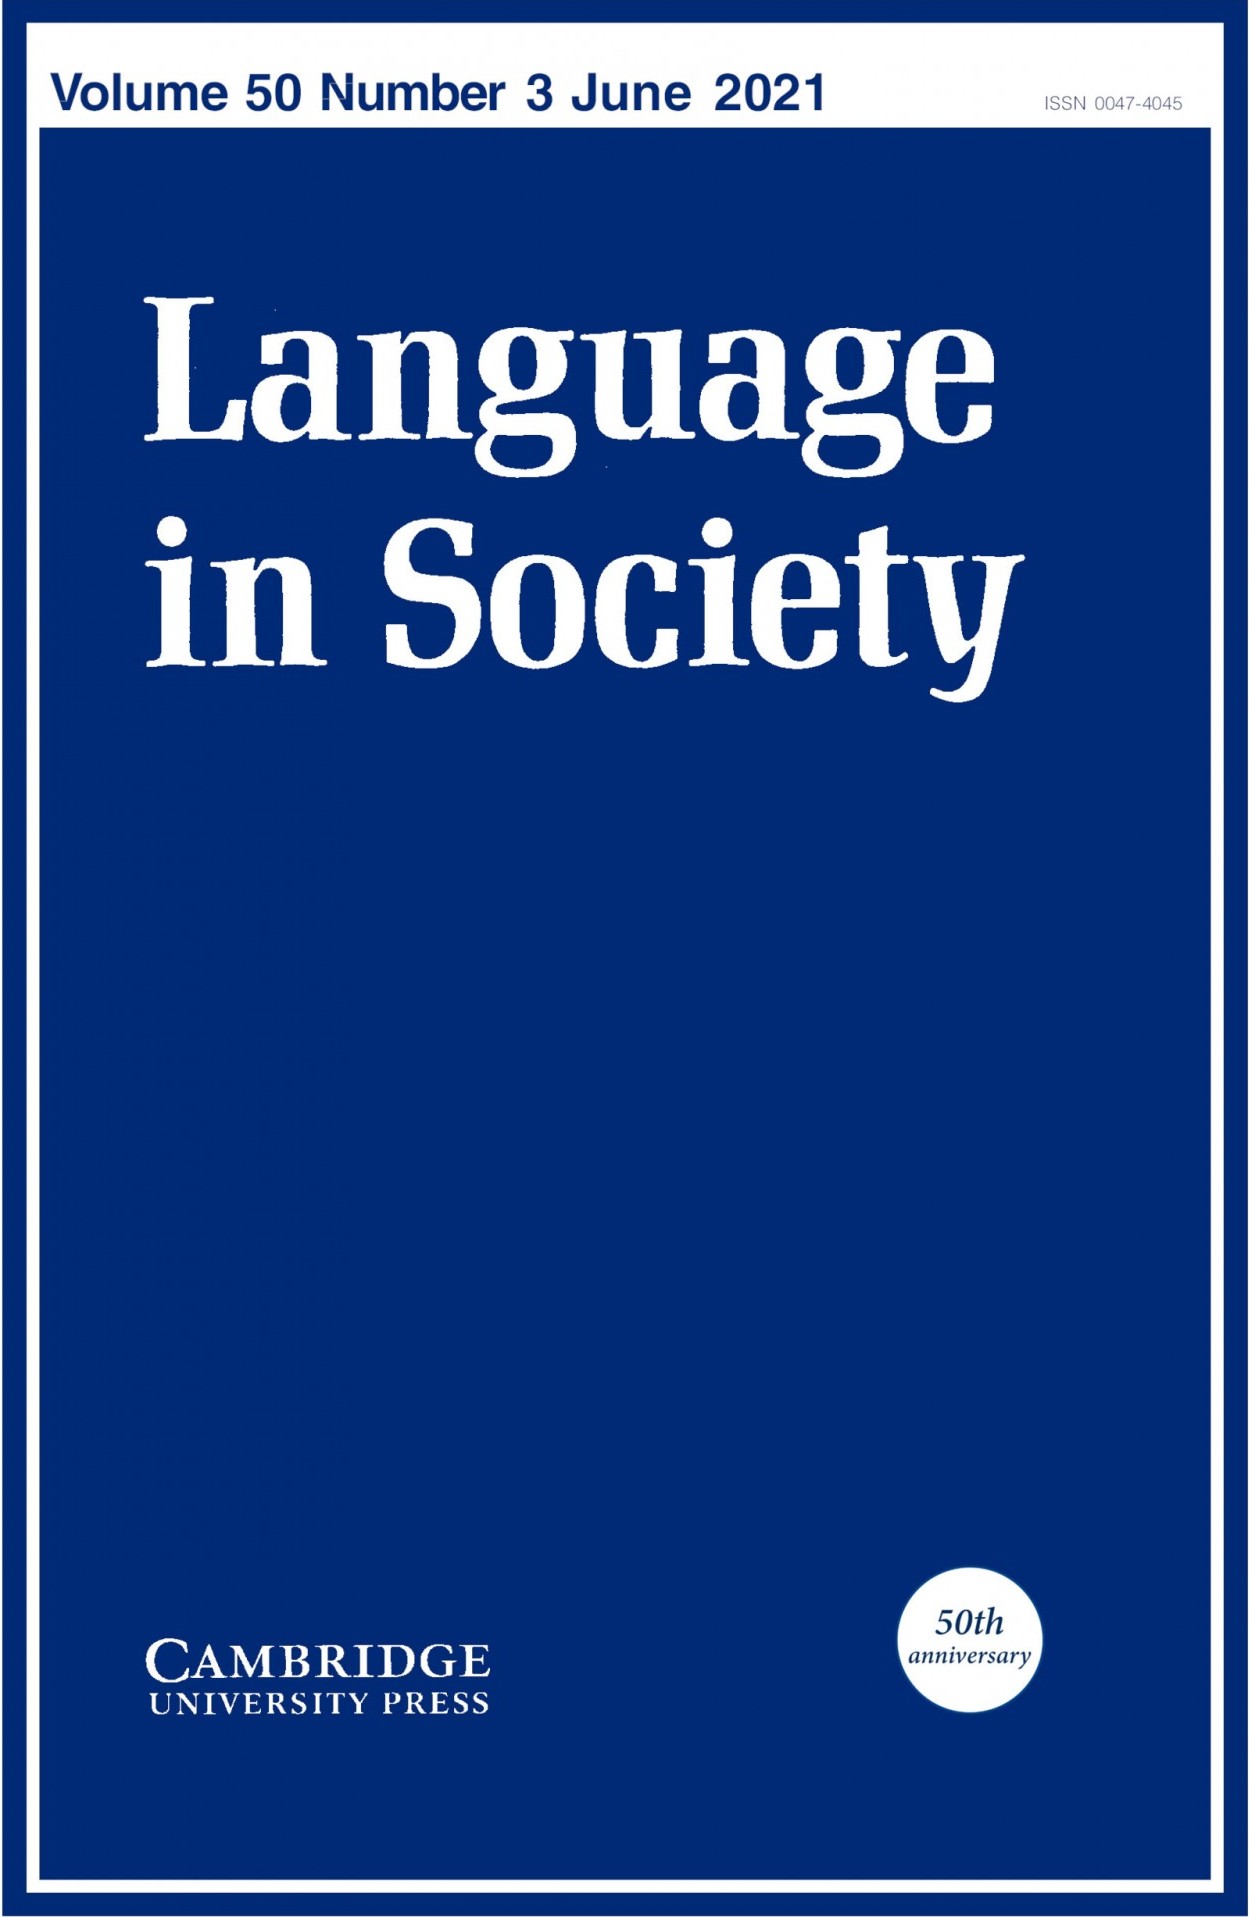 Journal Cover: Language in Society